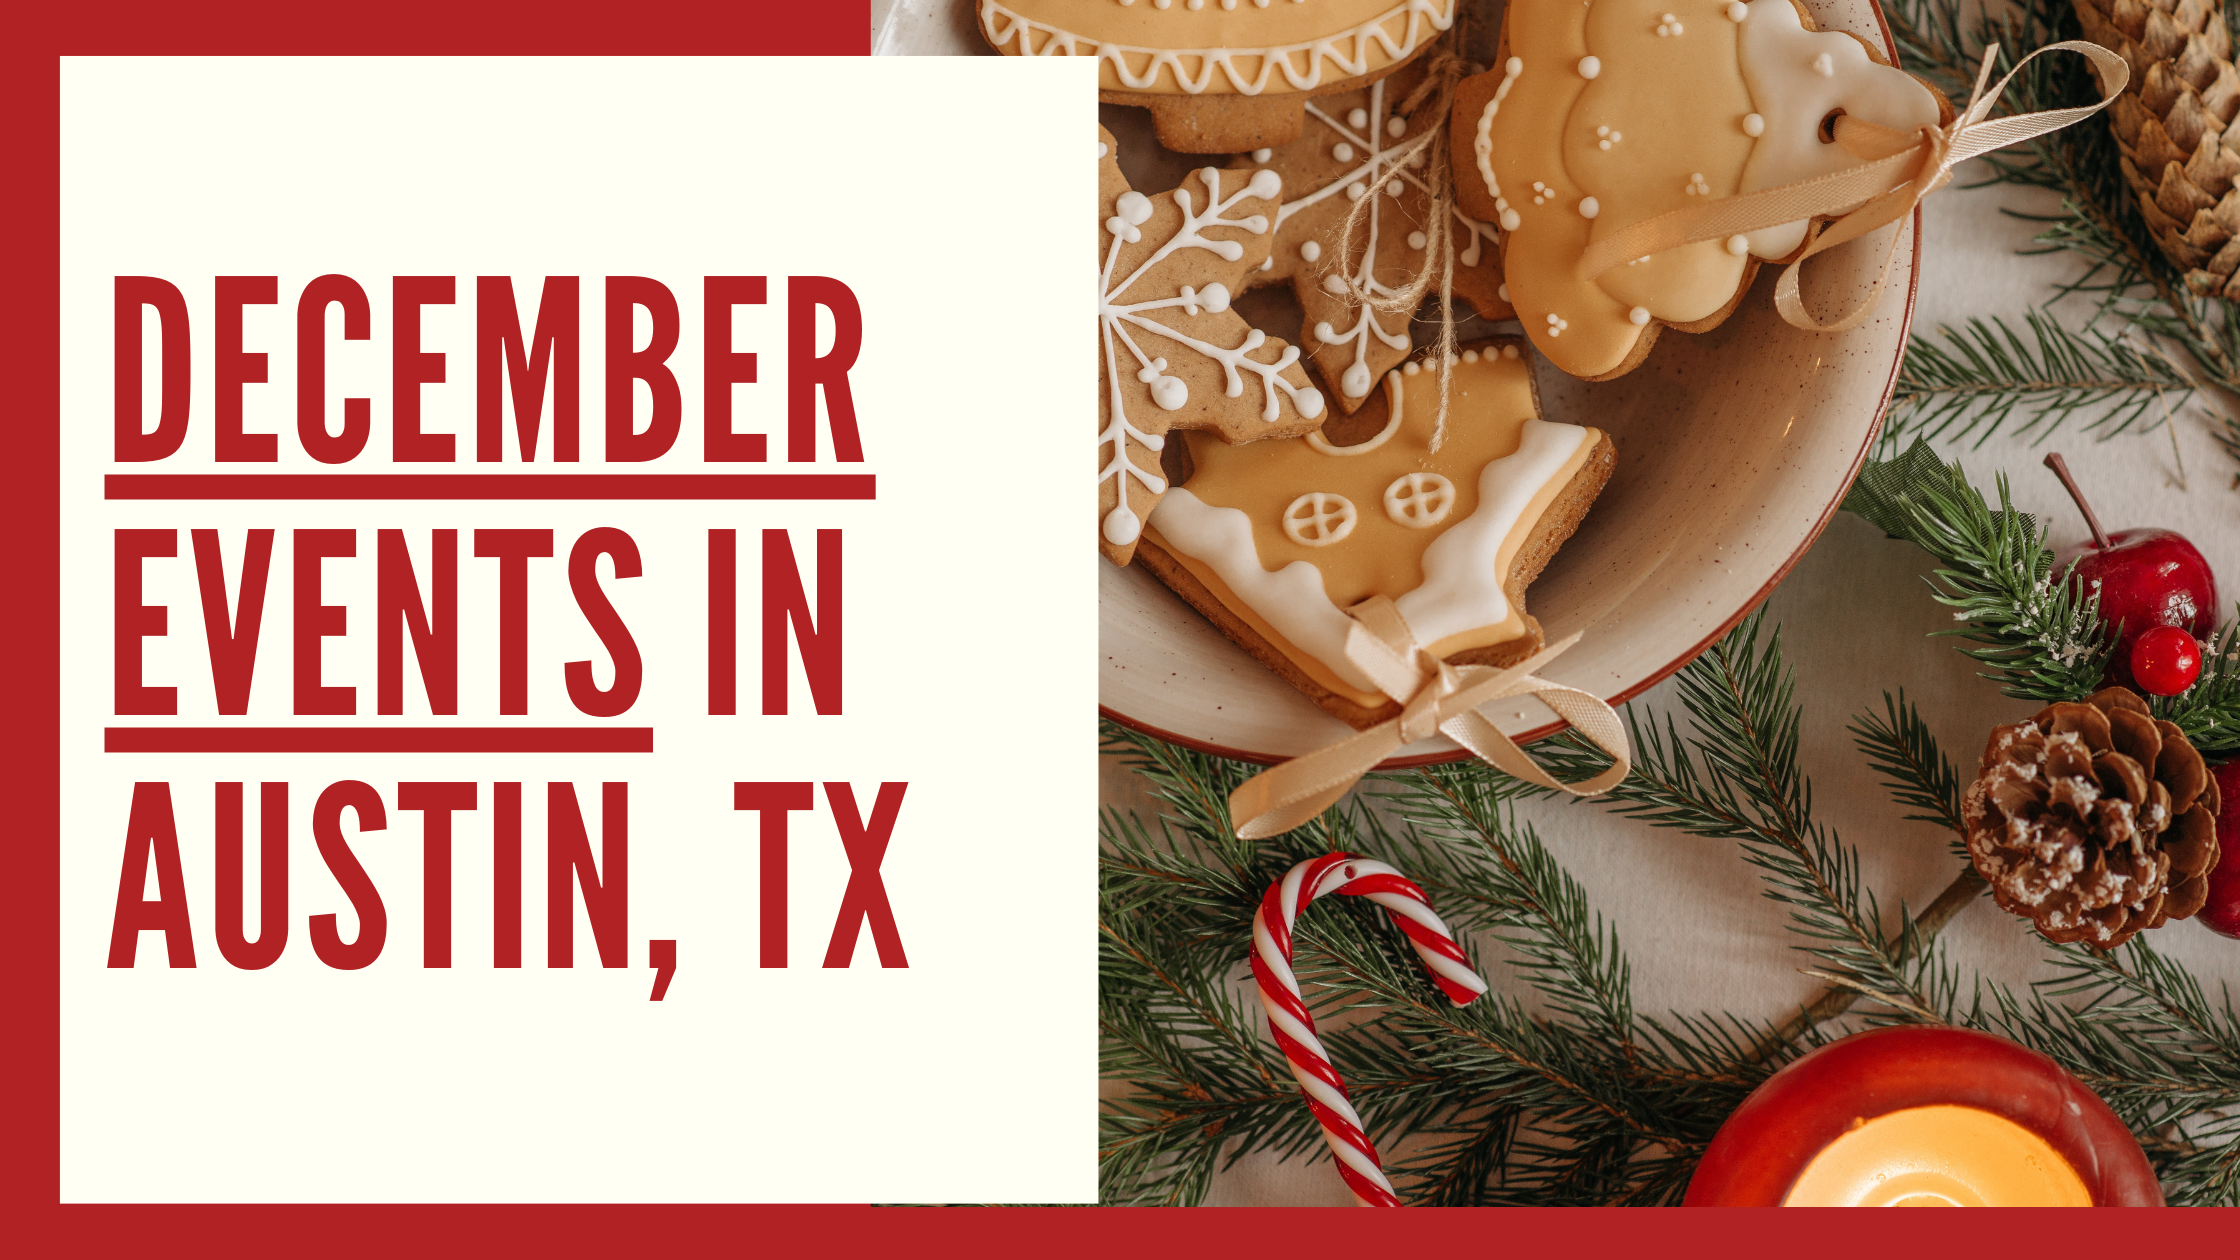 Round Rock Holiday Bazaar Arts and Crafts Show - Austin Fun for Kids